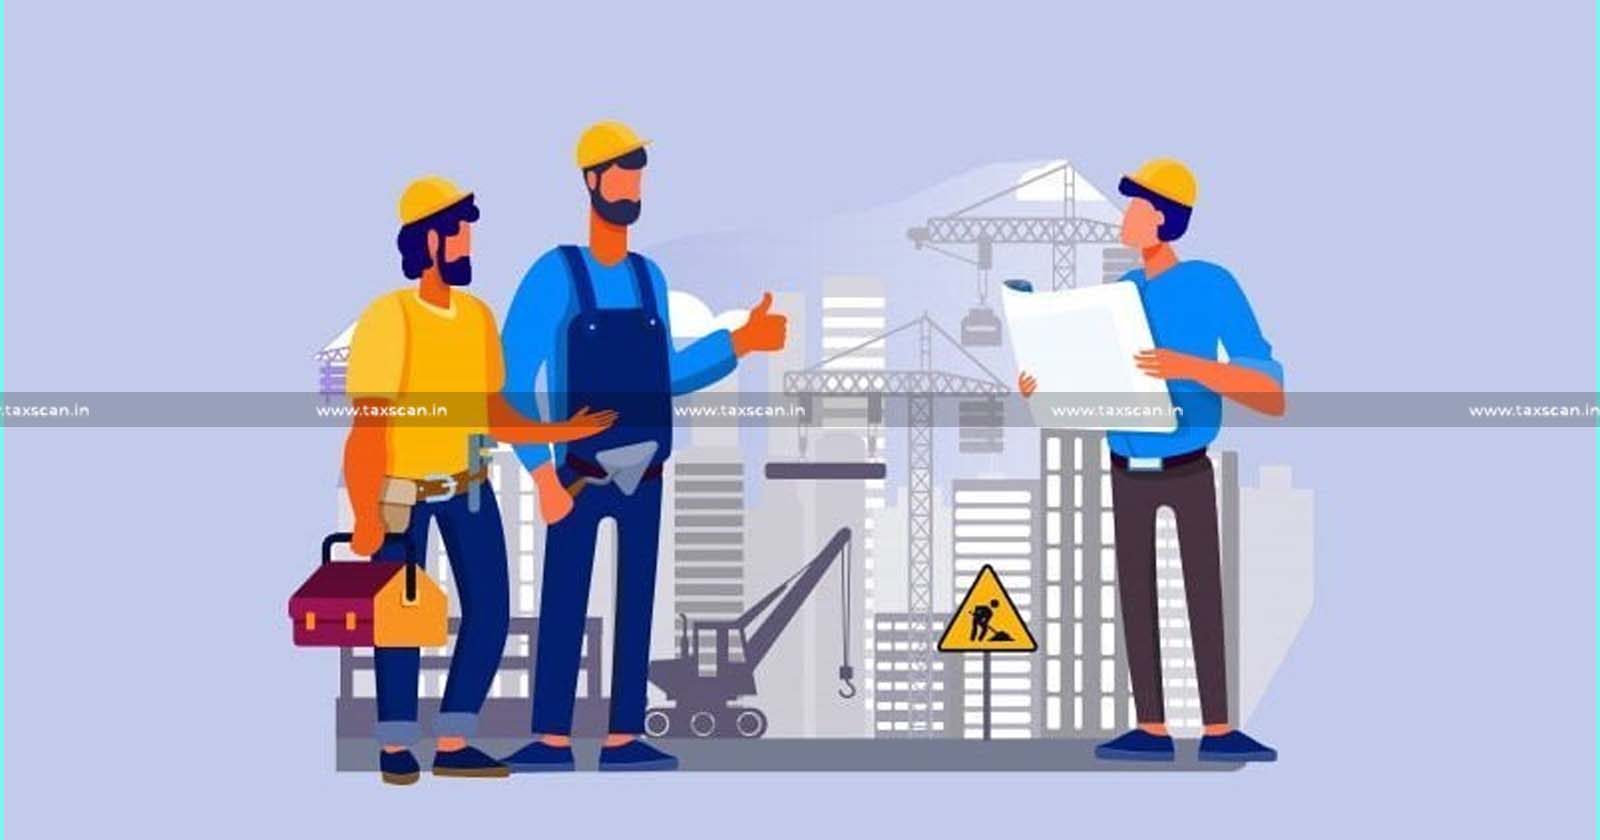 GST ITC - GST - ITC - Work Contract Services for Construction of Hotel Building - Work Contract Services - Construction of Hotel Building - Hotel Building - Tripura Highcourt - taxscan